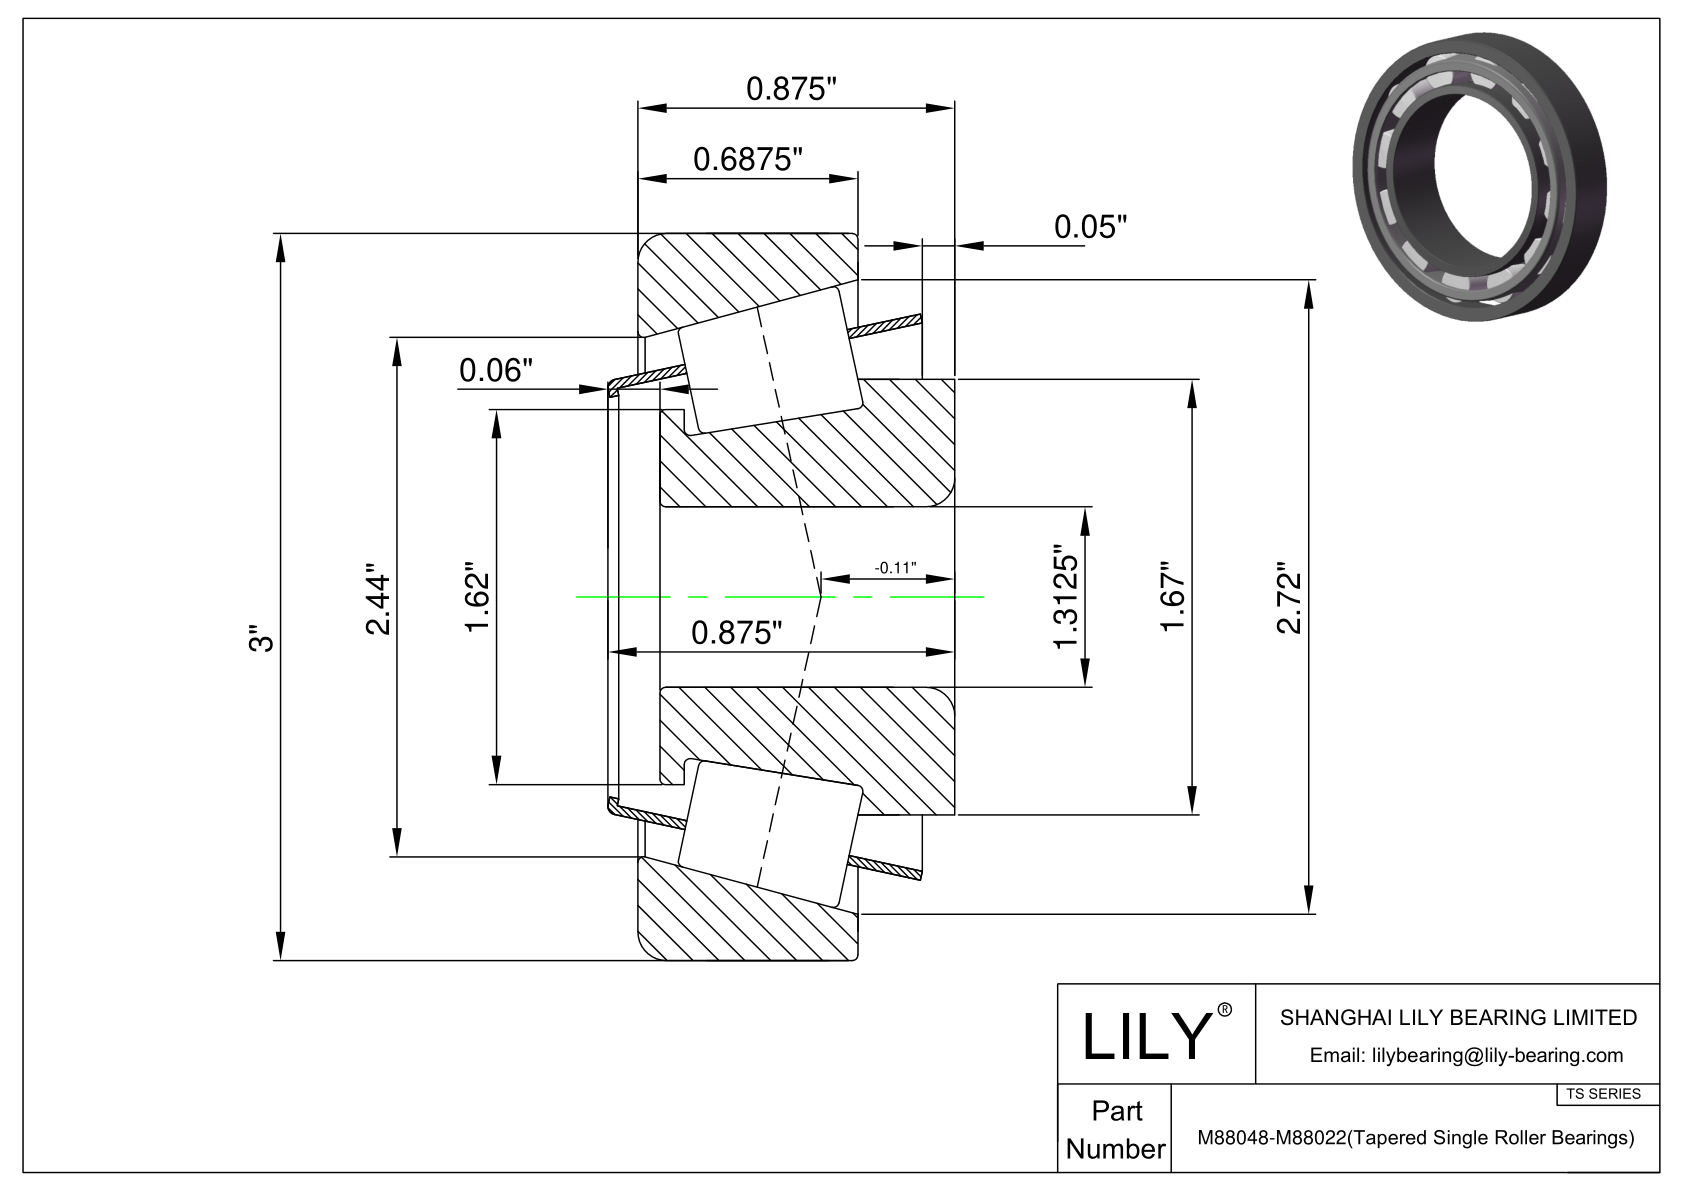 M88048-M88022 TS (Tapered Single Roller Bearings) (Imperial) cad drawing